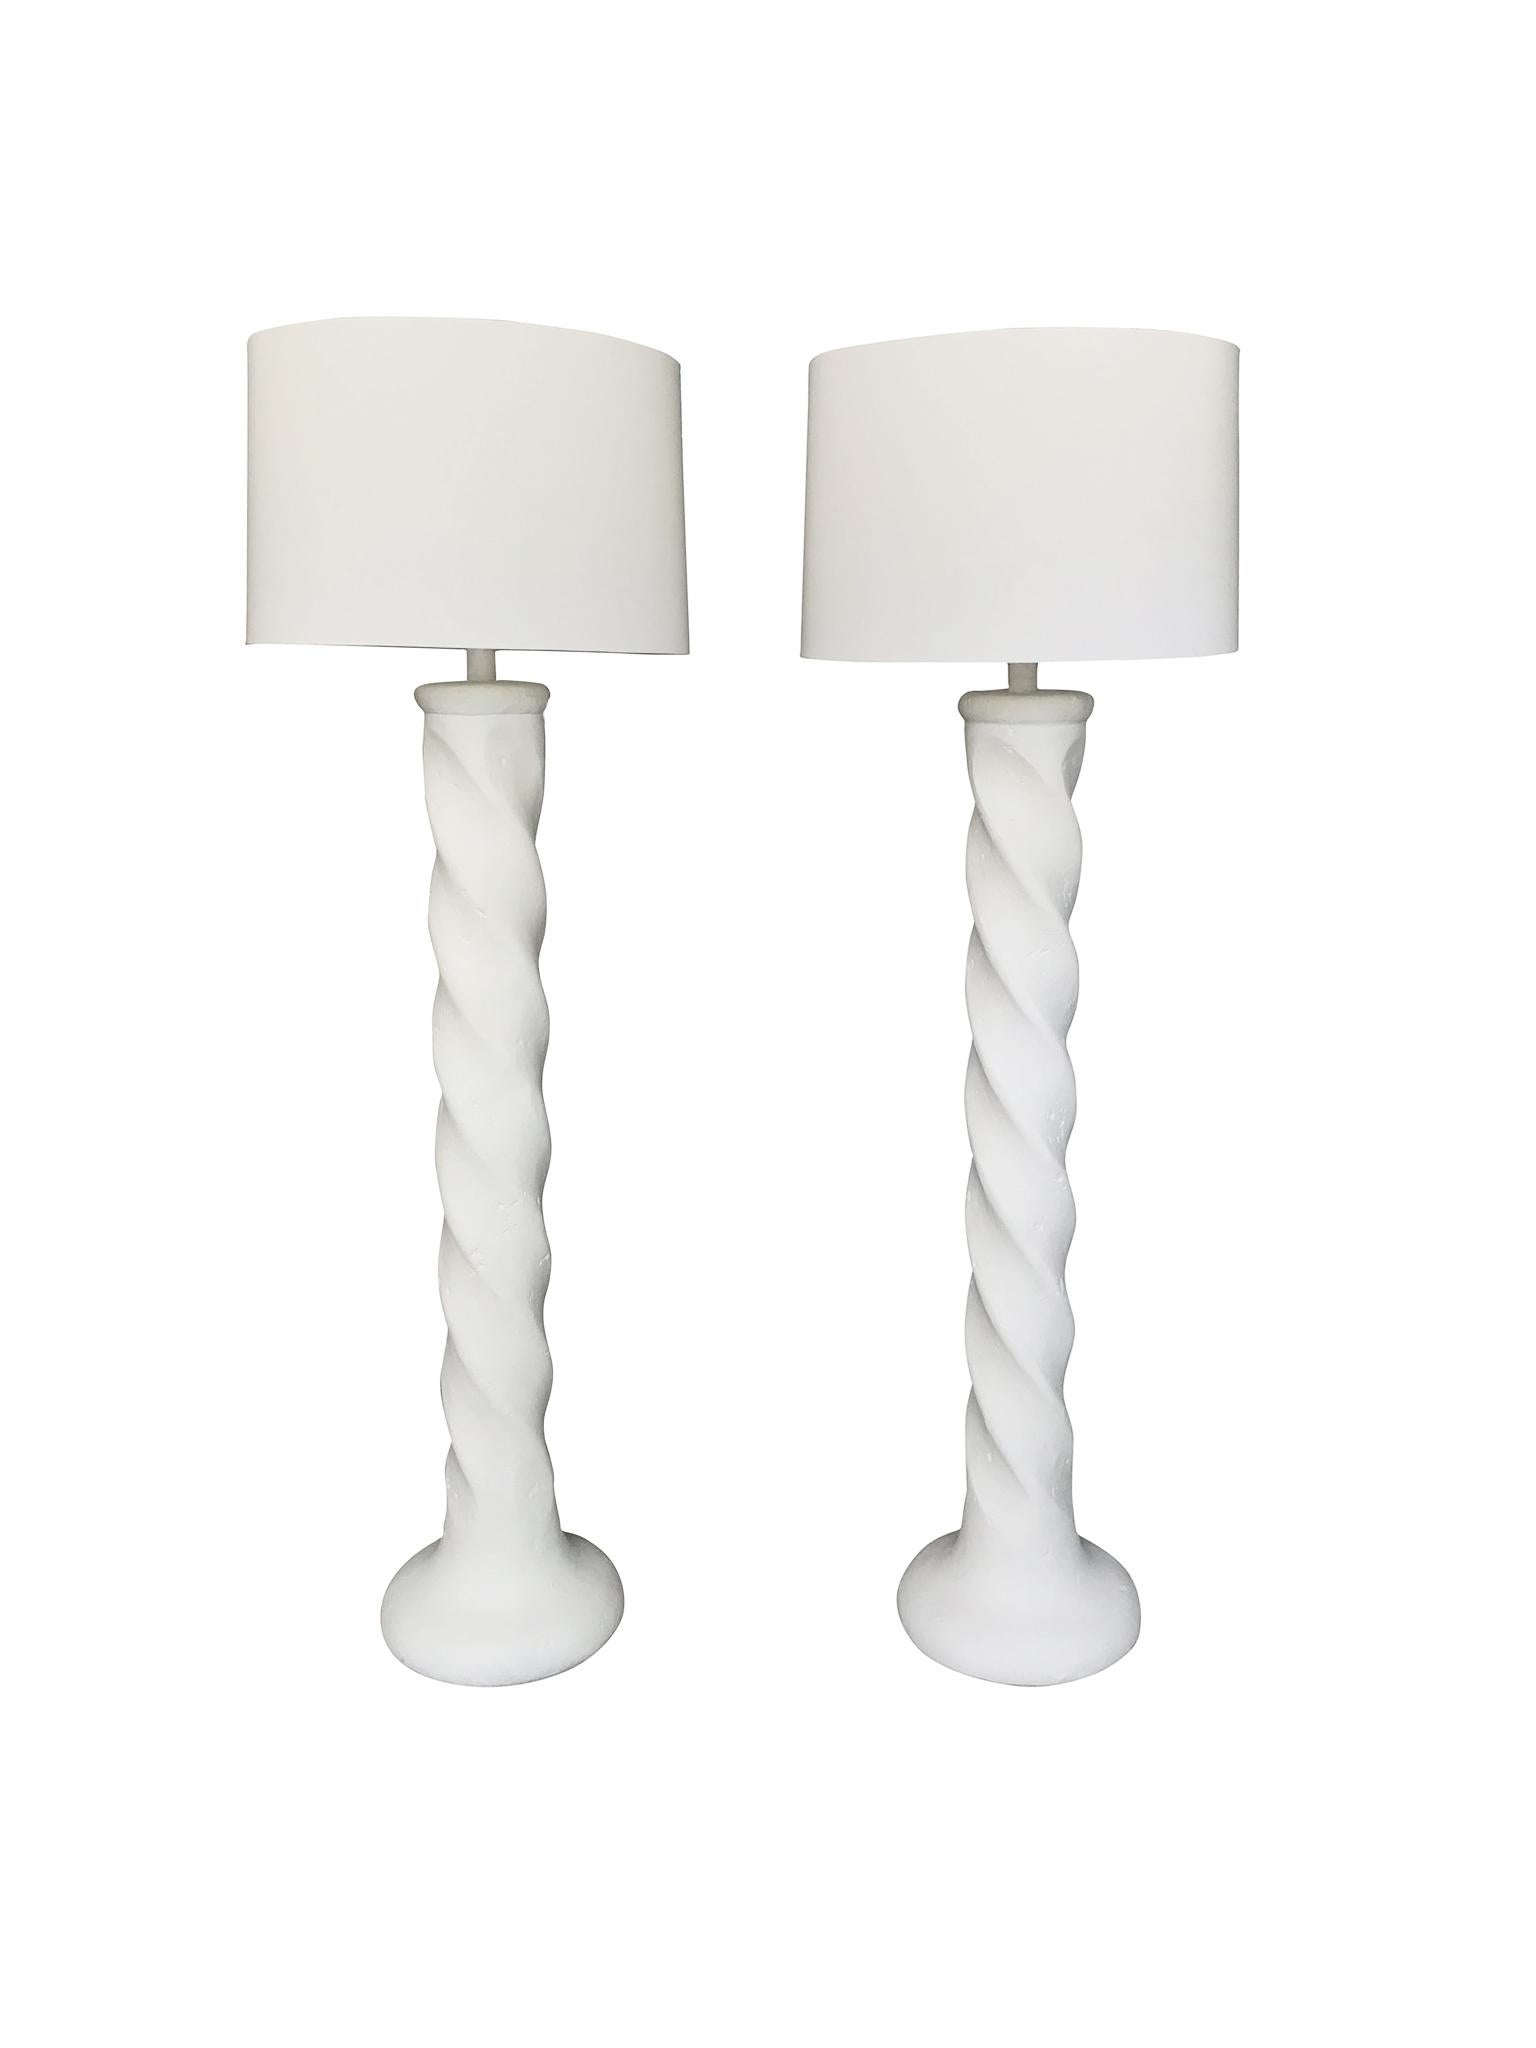 A Neoclassical-style pair of white column floor lamps by Michael Taylor. Made in the 1970s. Newly rewired with a single bulb sockets. New hardware. The lamps consist of plaster and new custom linen shades. Taylor's dynamic design is reminiscent of